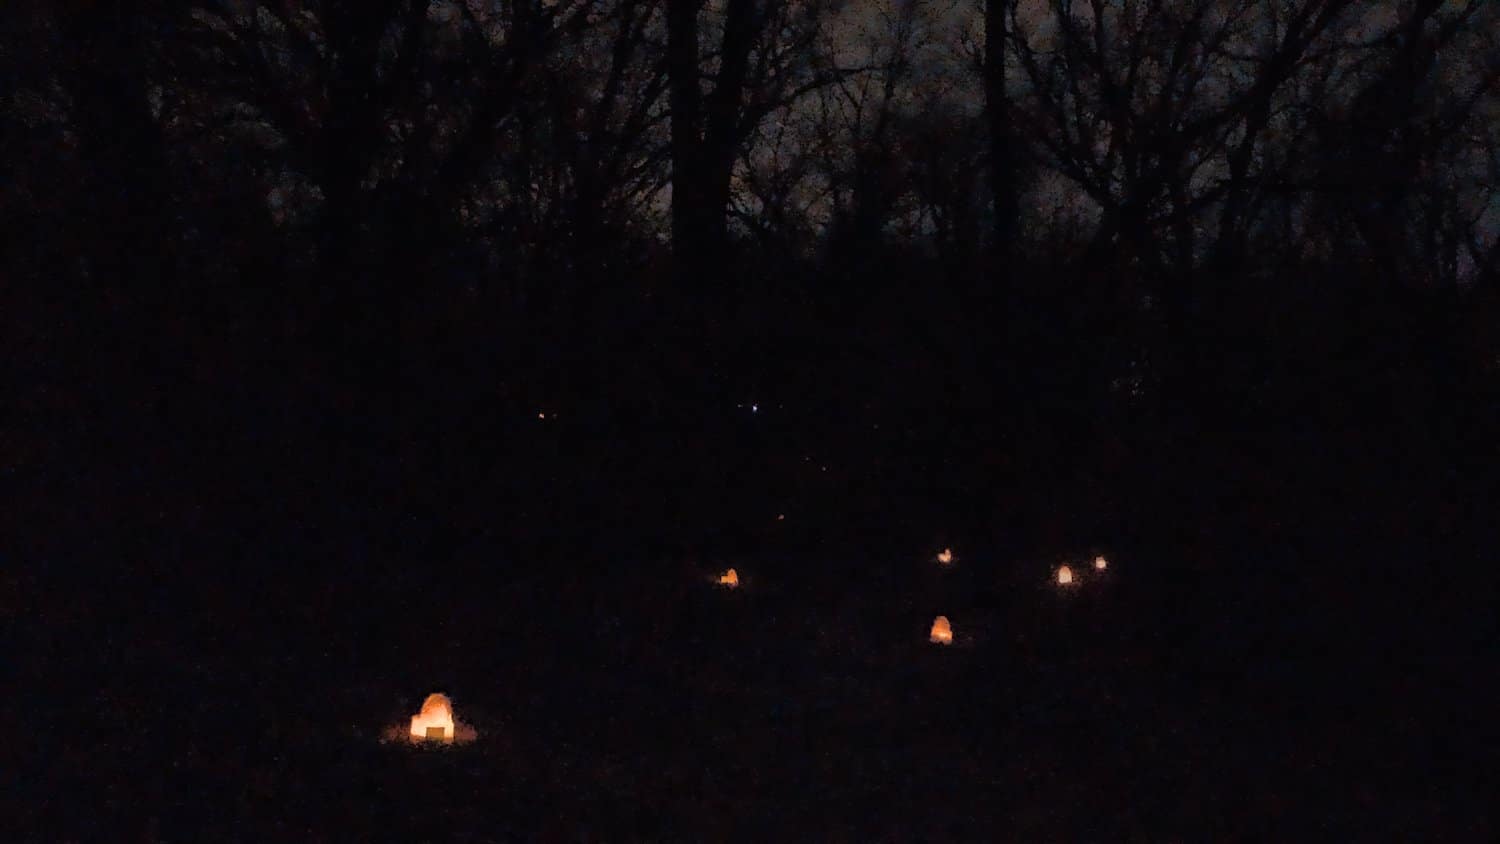 Luminarias outlines the path through the woods.